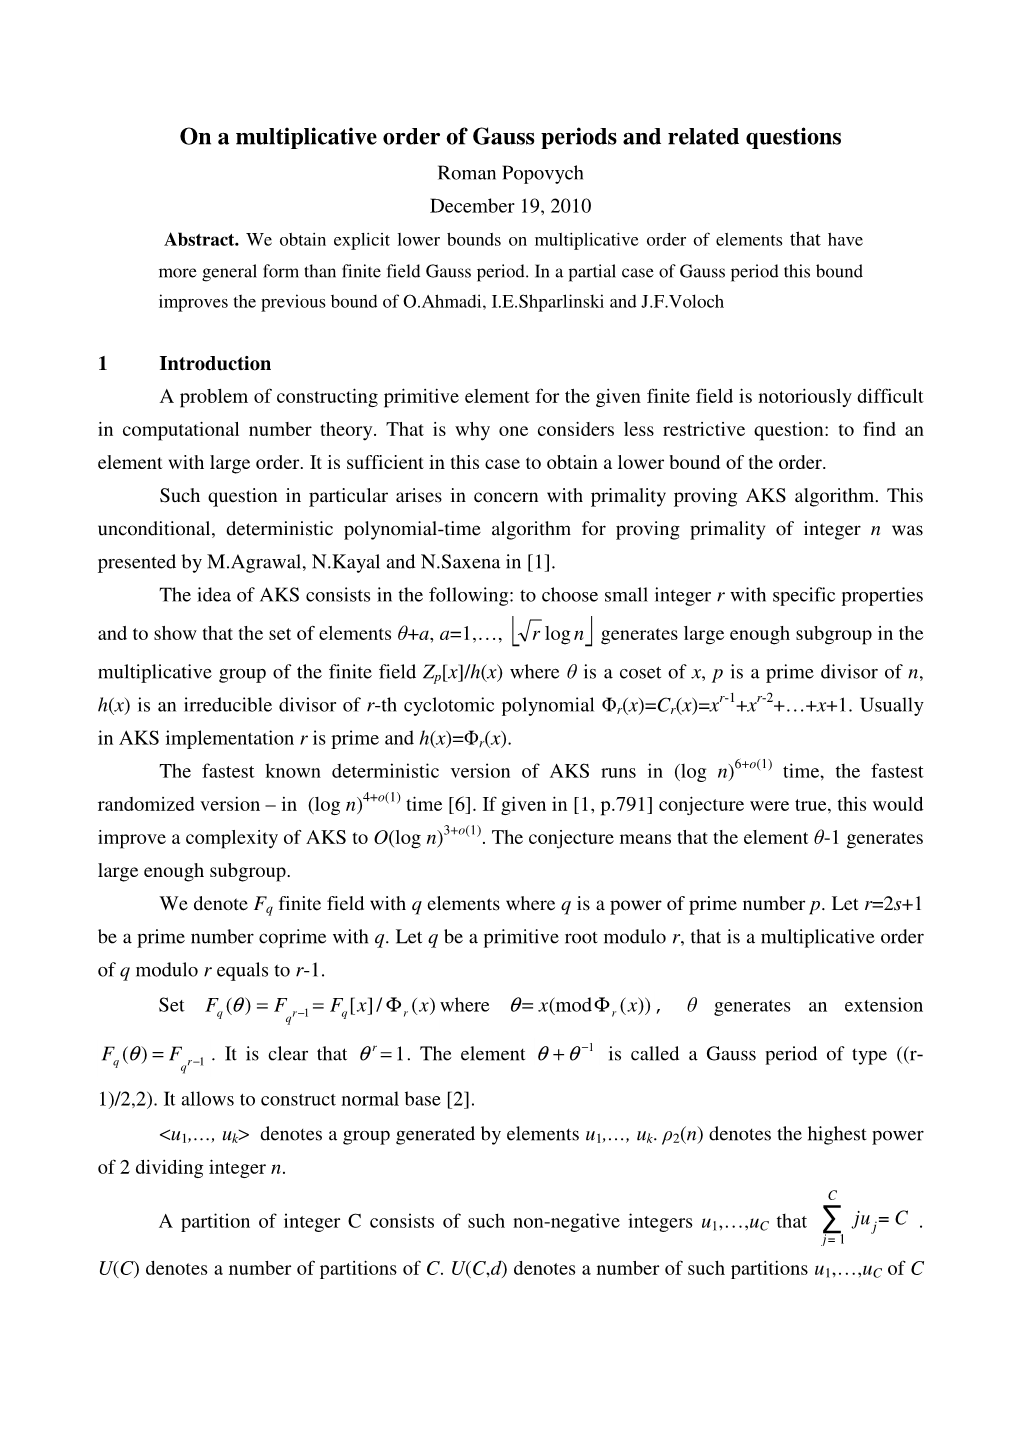 On a Multiplicative Order of Gauss Periods and Related Questions Roman Popovych December 19, 2010 Abstract